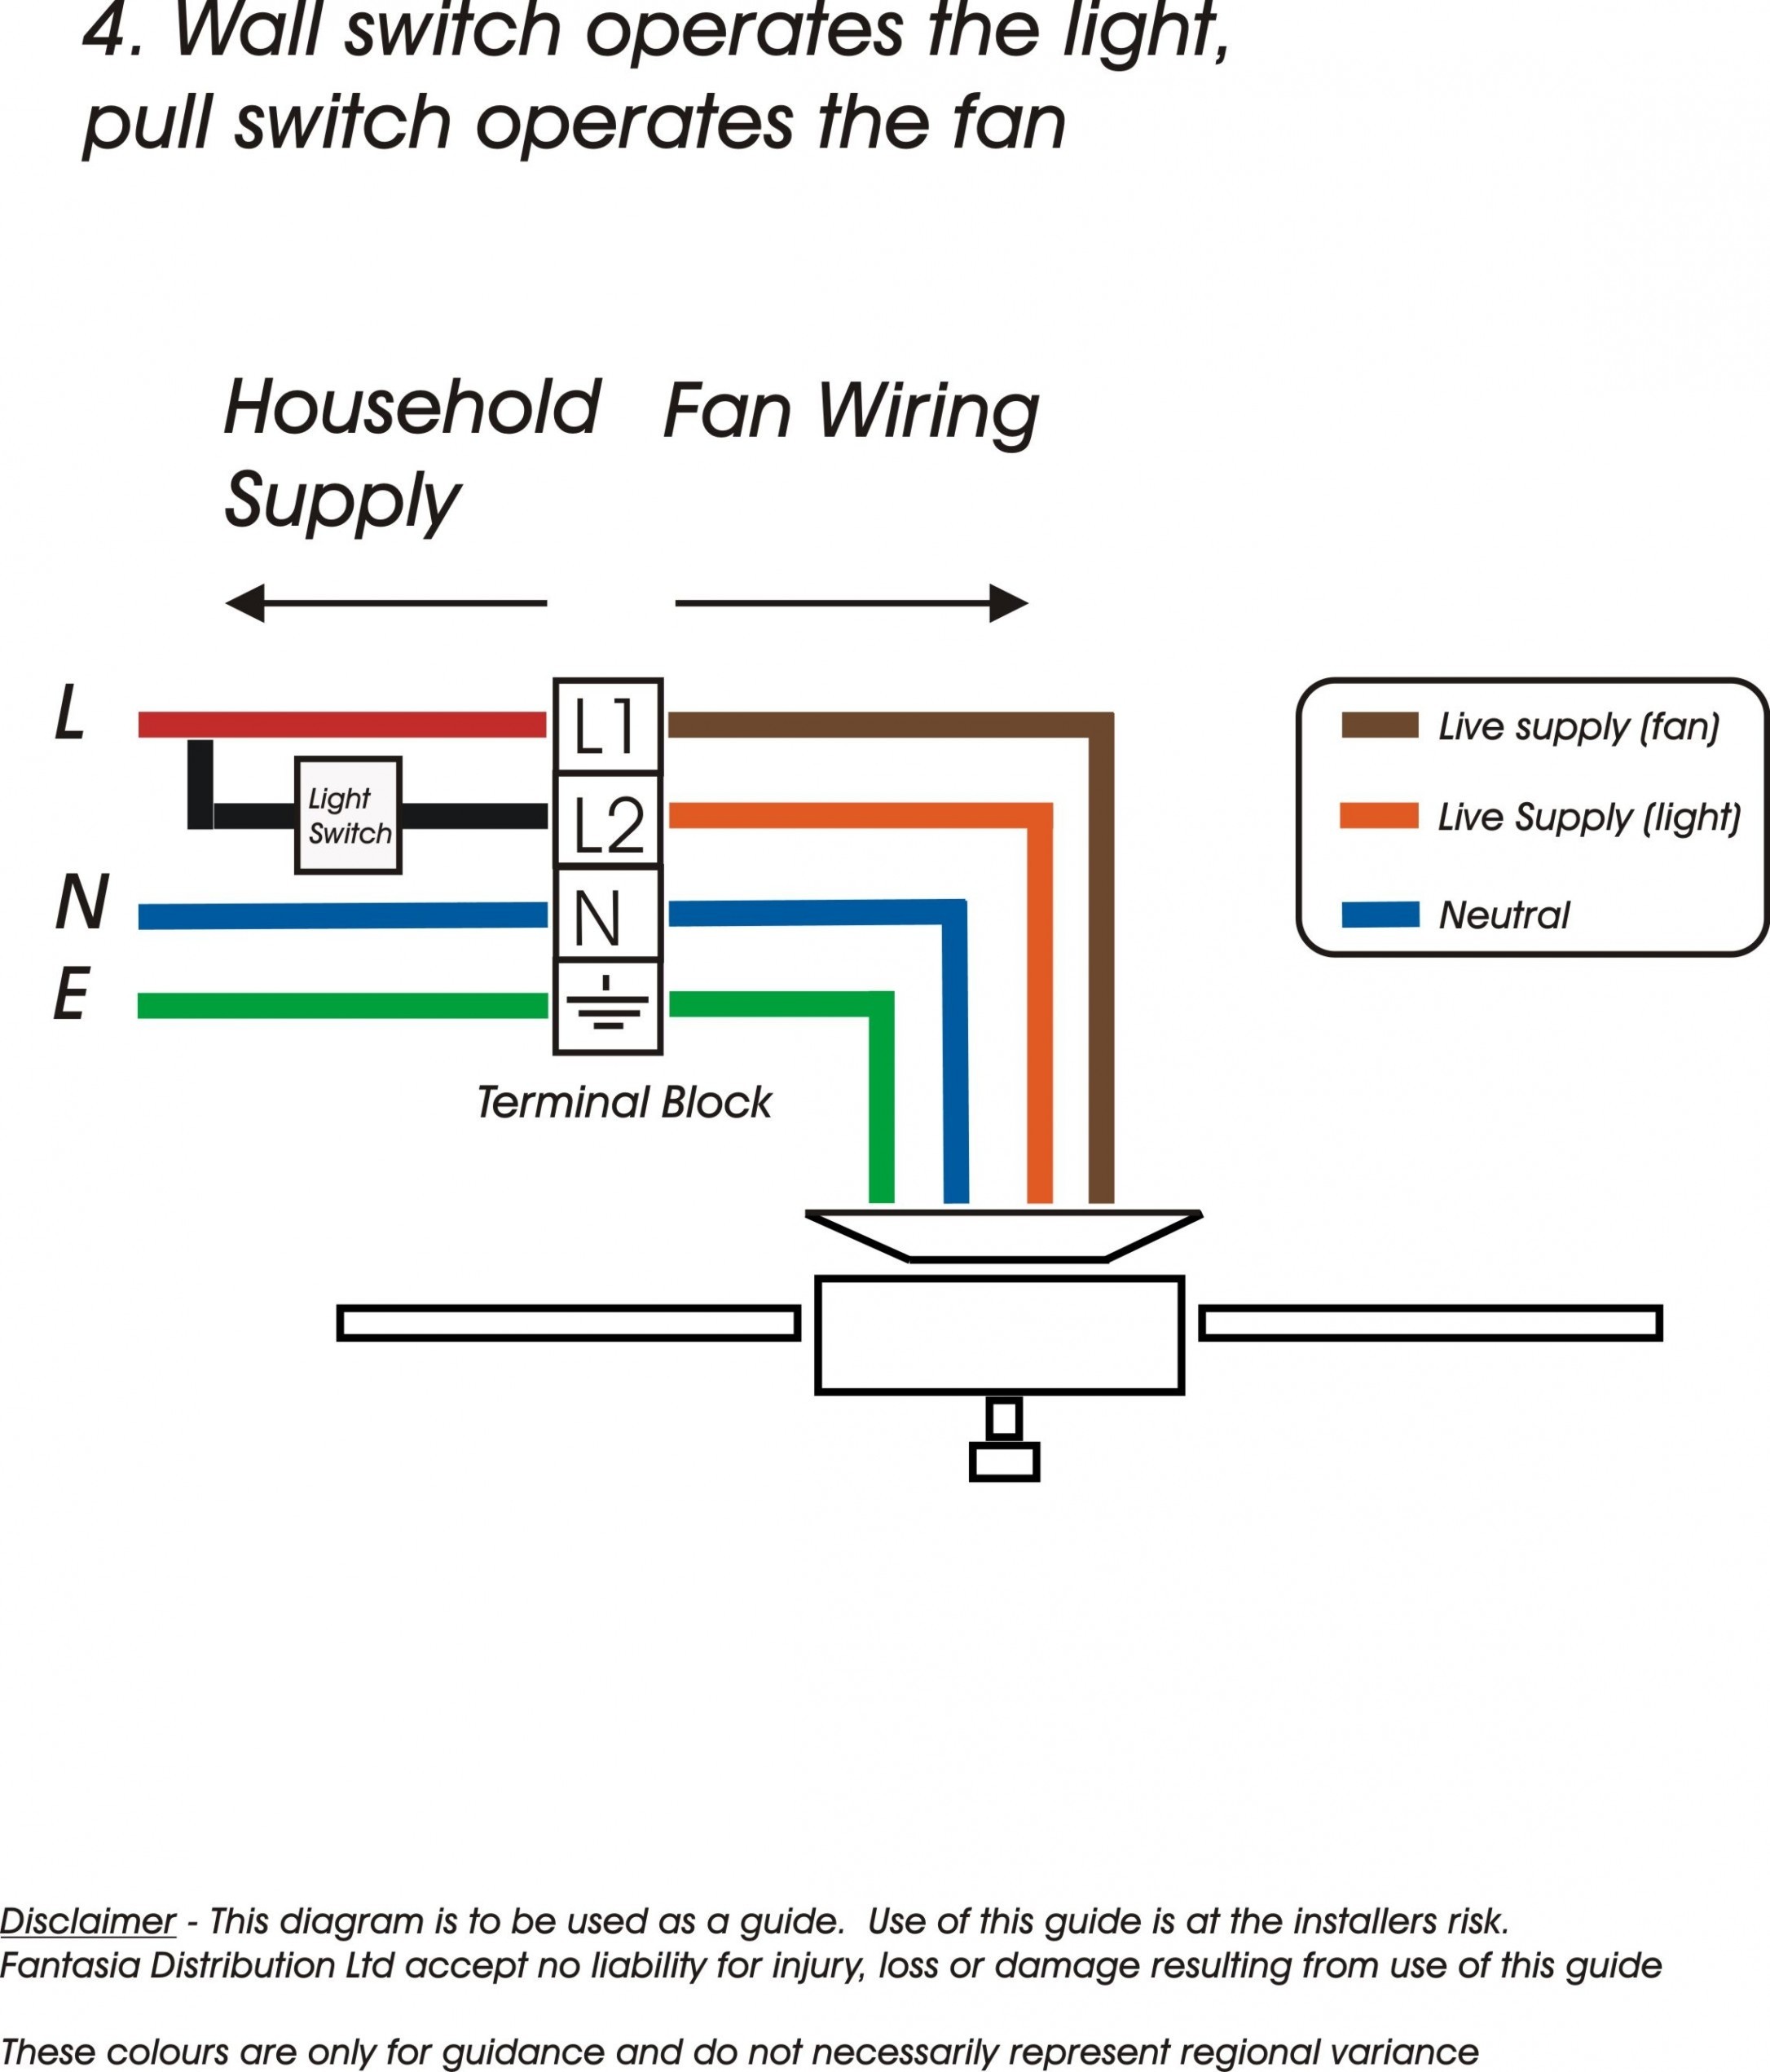 How To Wire A 3 Way Light Switch Diagram Valid Energy Level Diagram – Hvac Diagram Best Hvac Diagram 0d – Wire